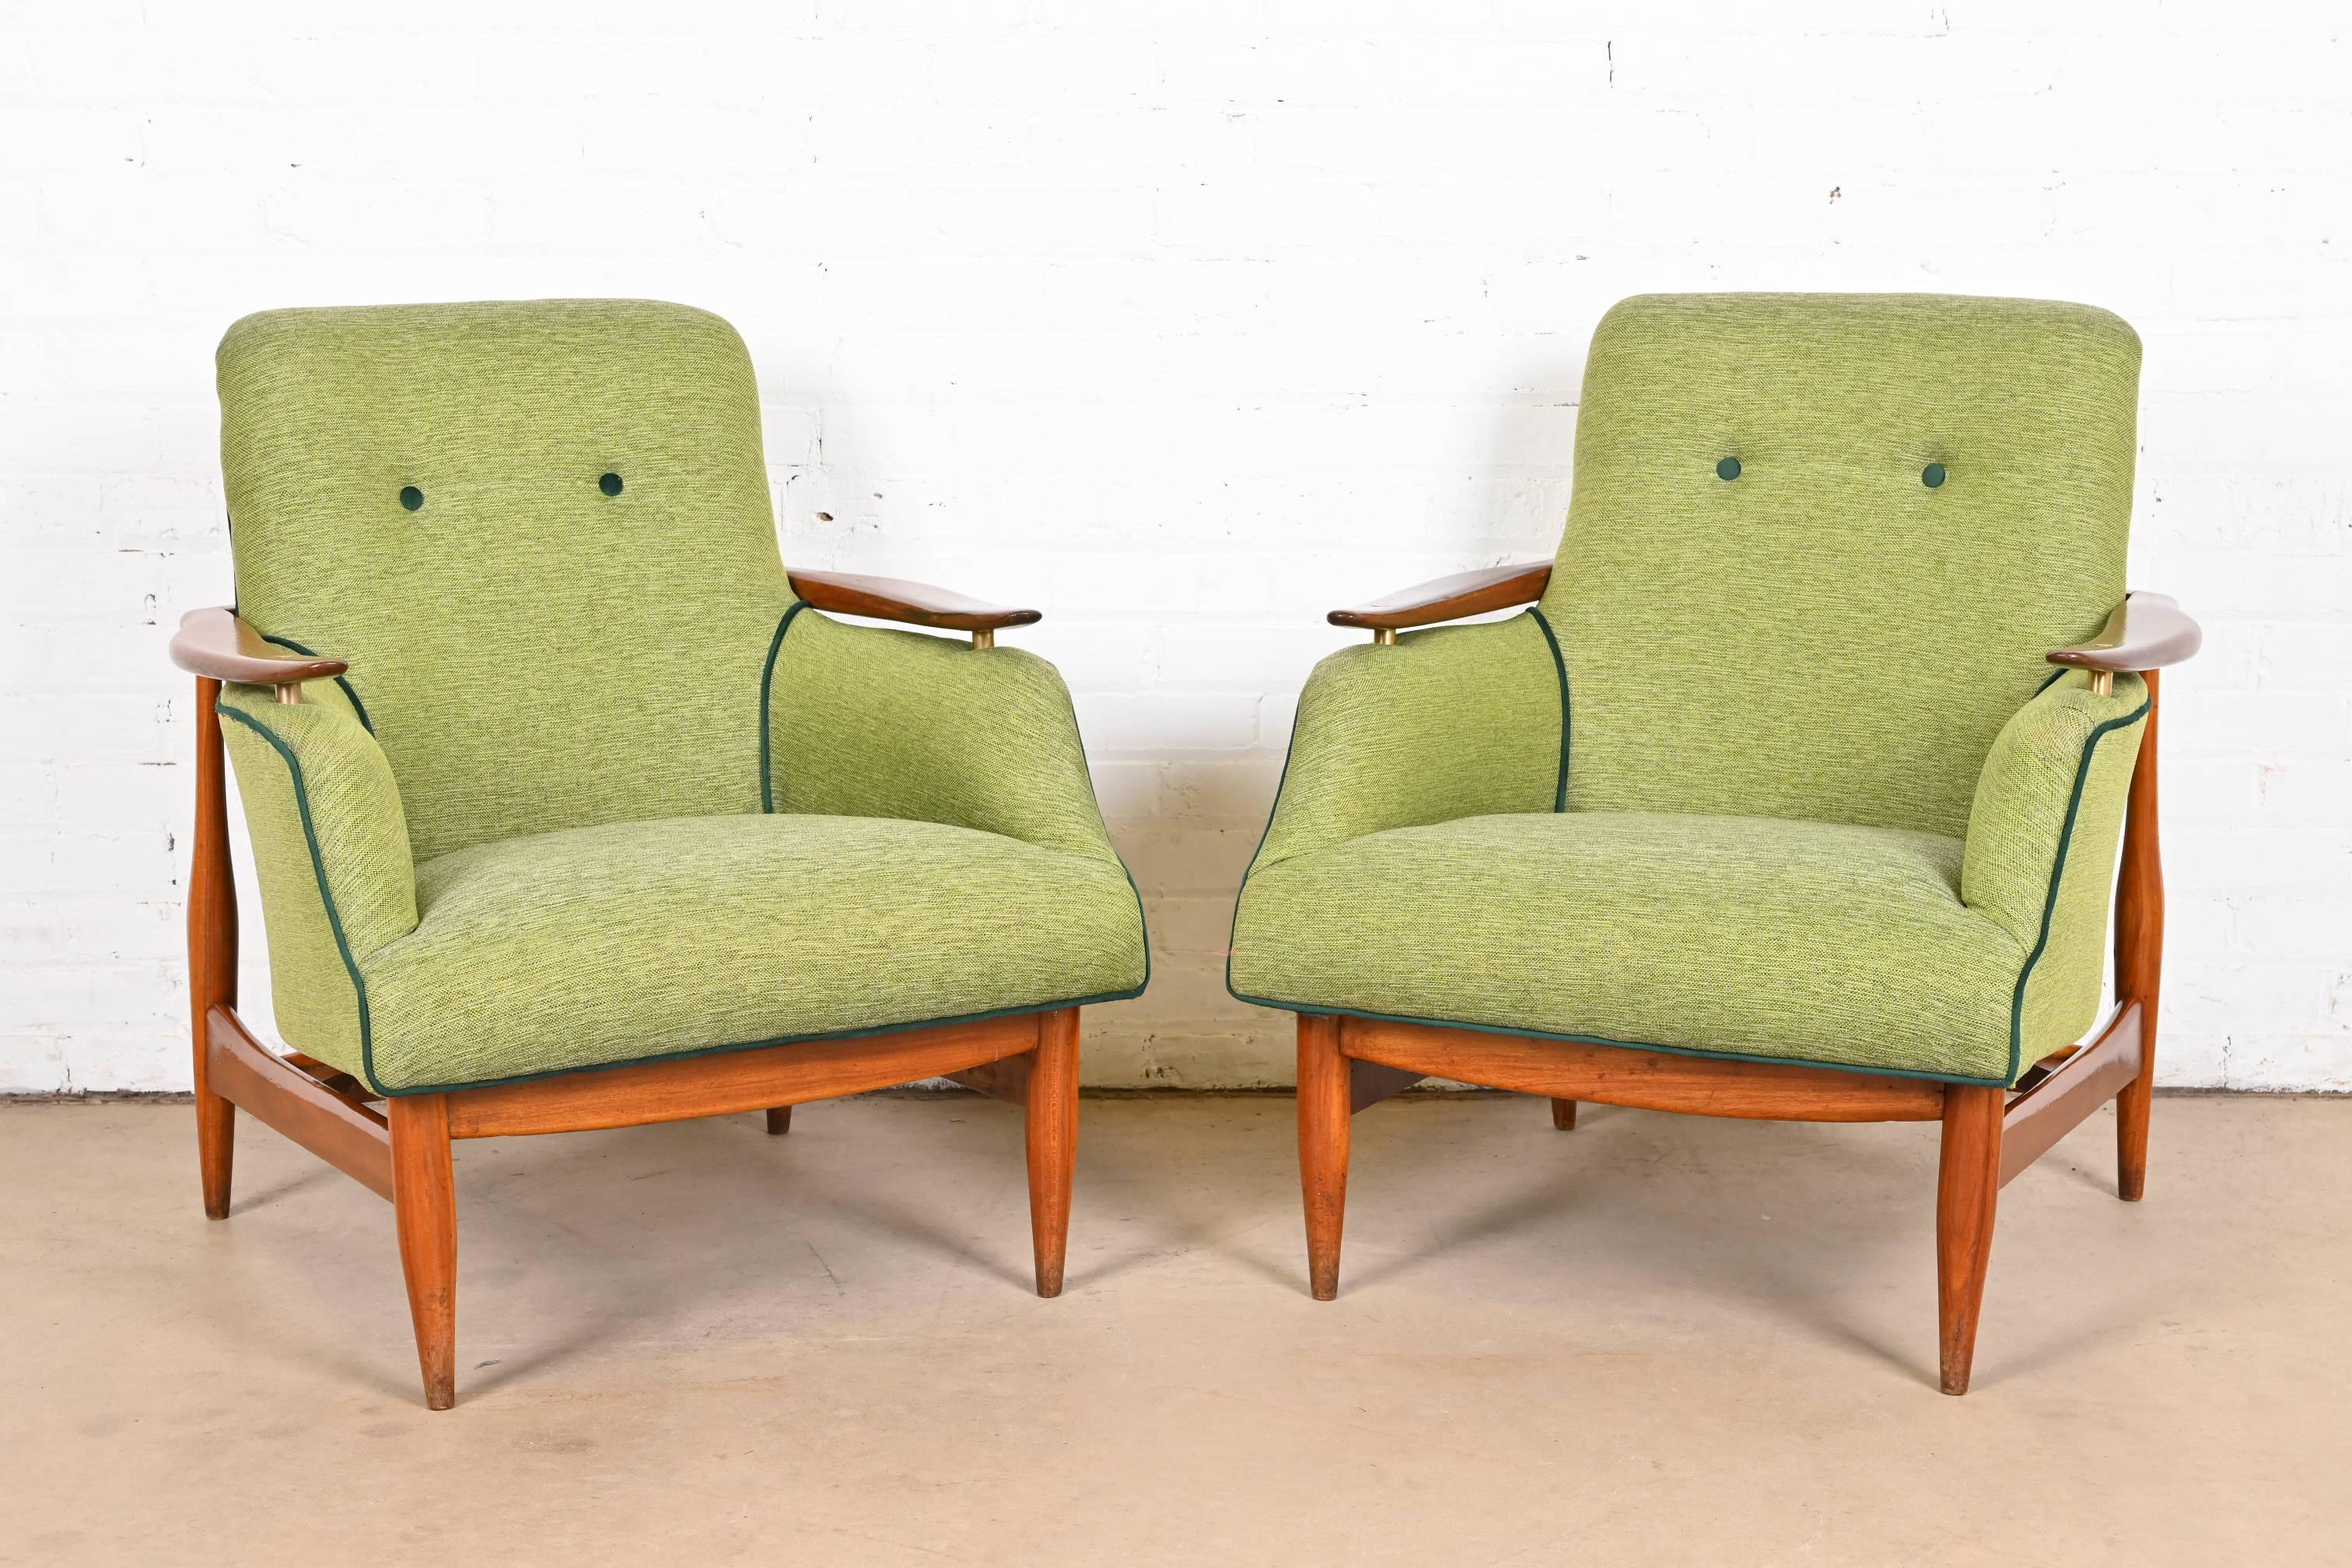 A gorgeous pair of mid-century Danish Modern lounge chairs

Attributed to Finn Juhl

Denmark, 1950s

Sculpted teak frames and brass accents, with green upholstered seats and tufted backs.

Measures: 27